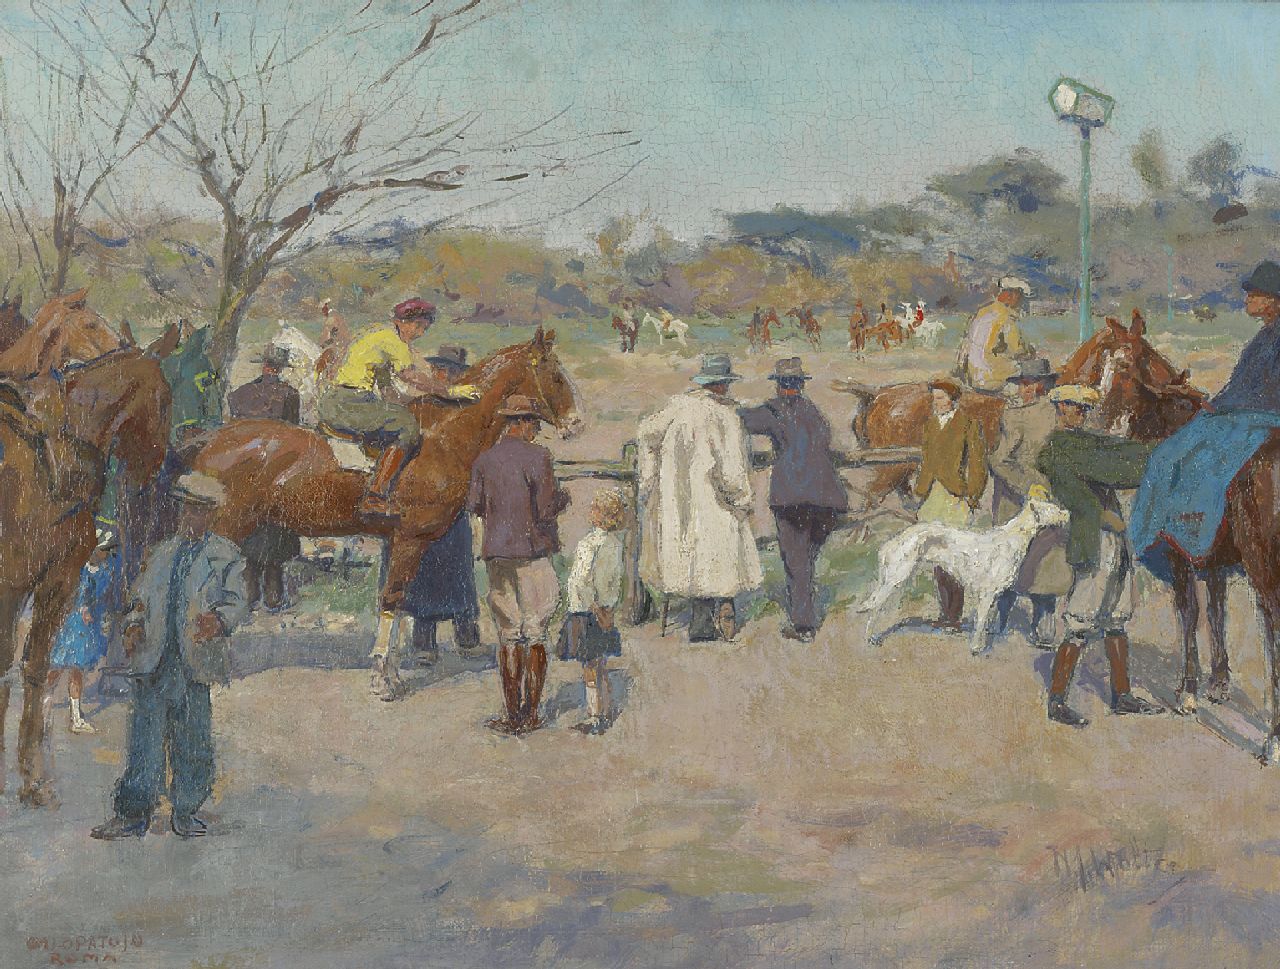 Wolter H.J.  | Hendrik Jan 'Henk' Wolter | Paintings offered for sale | Horseraces on the Galoppatoio, Villa Borghese, Rome, oil on canvas 33.7 x 44.6 cm, signed l.r. and painted ca. 1938-1940